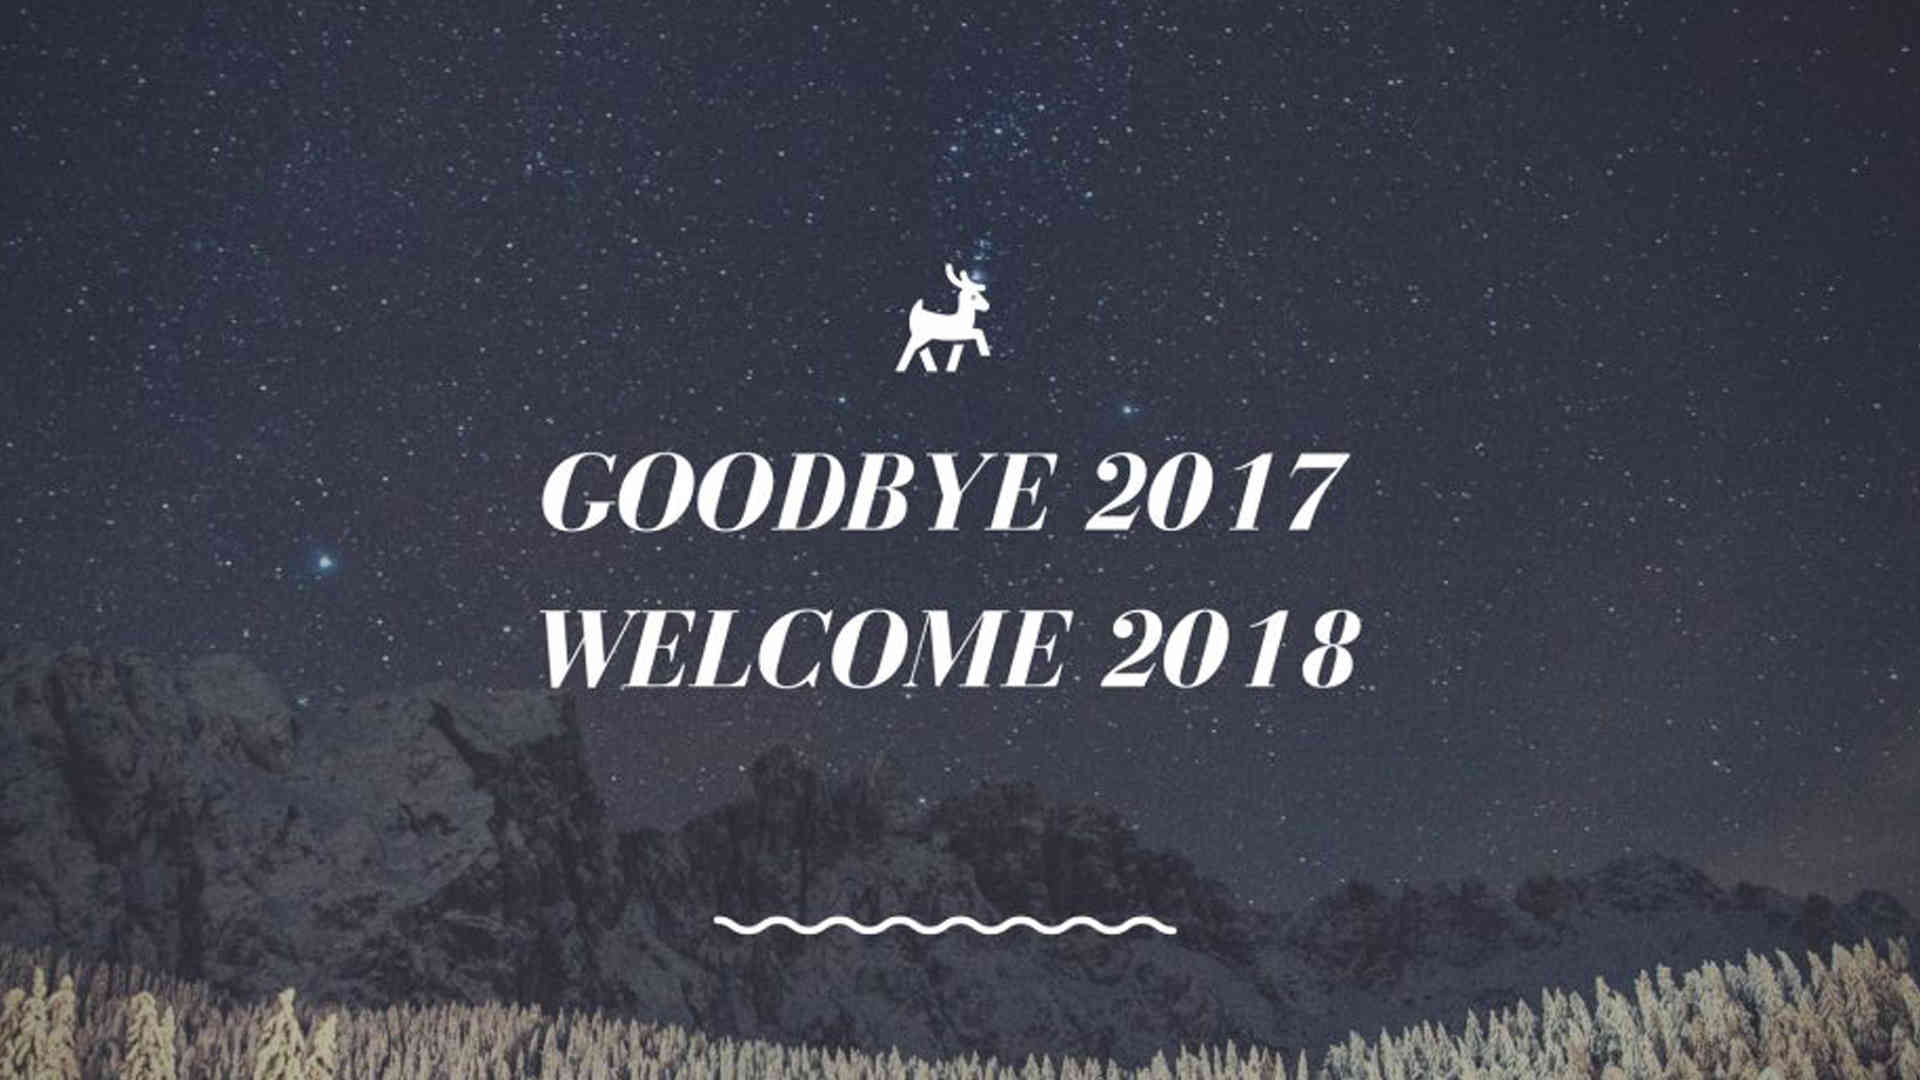 Goodbye 2017 Welcome 2018 New Year Image, SMS & Messages. Happy